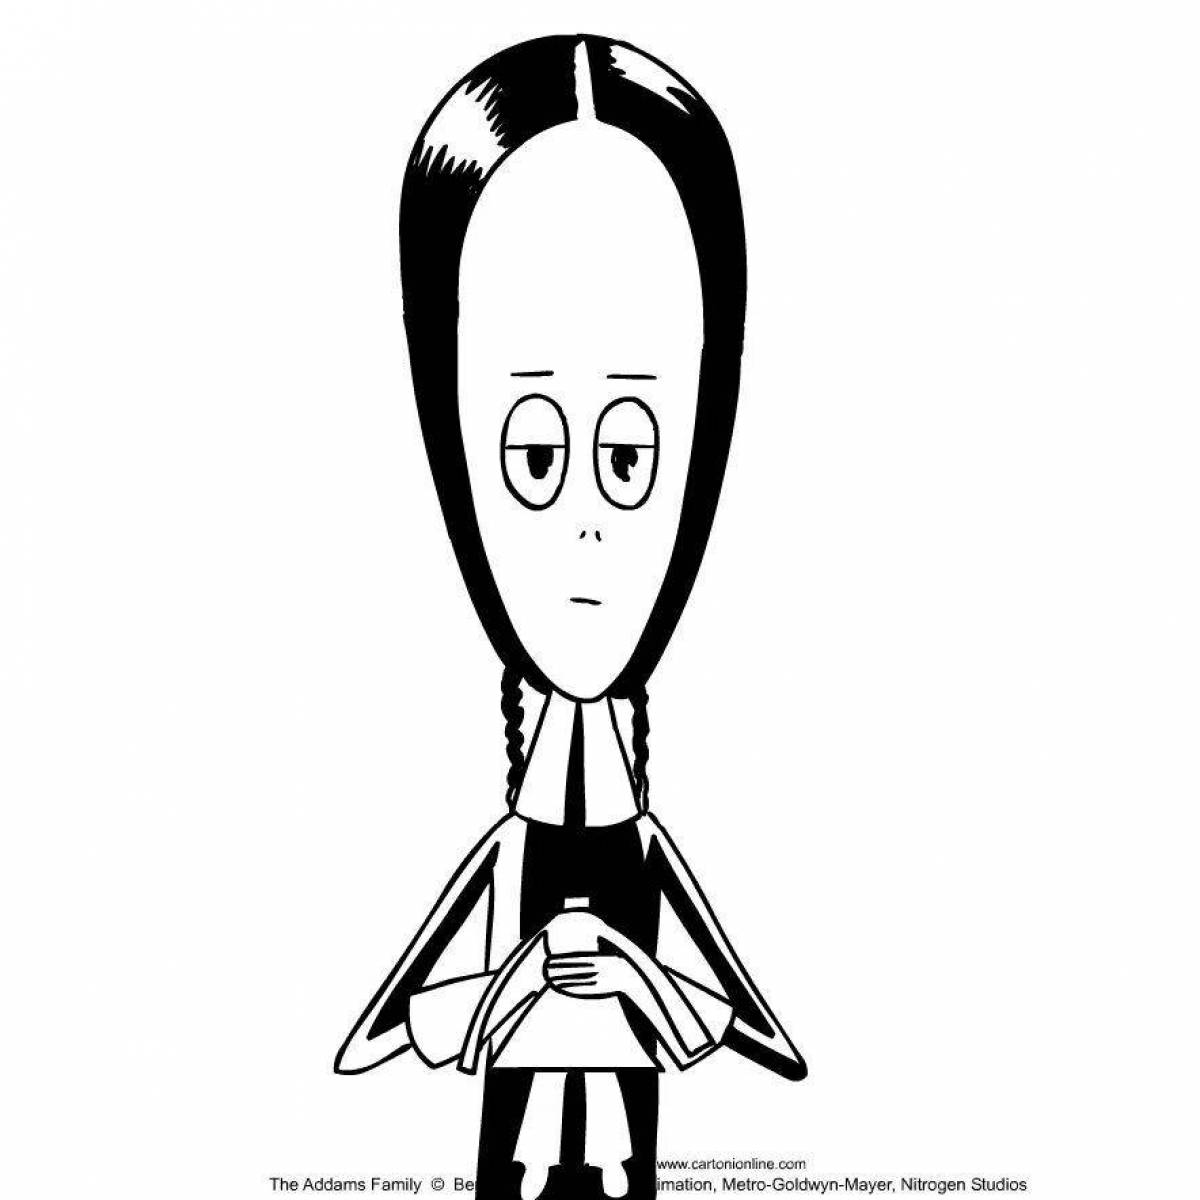 Wednesday Addams from series #4